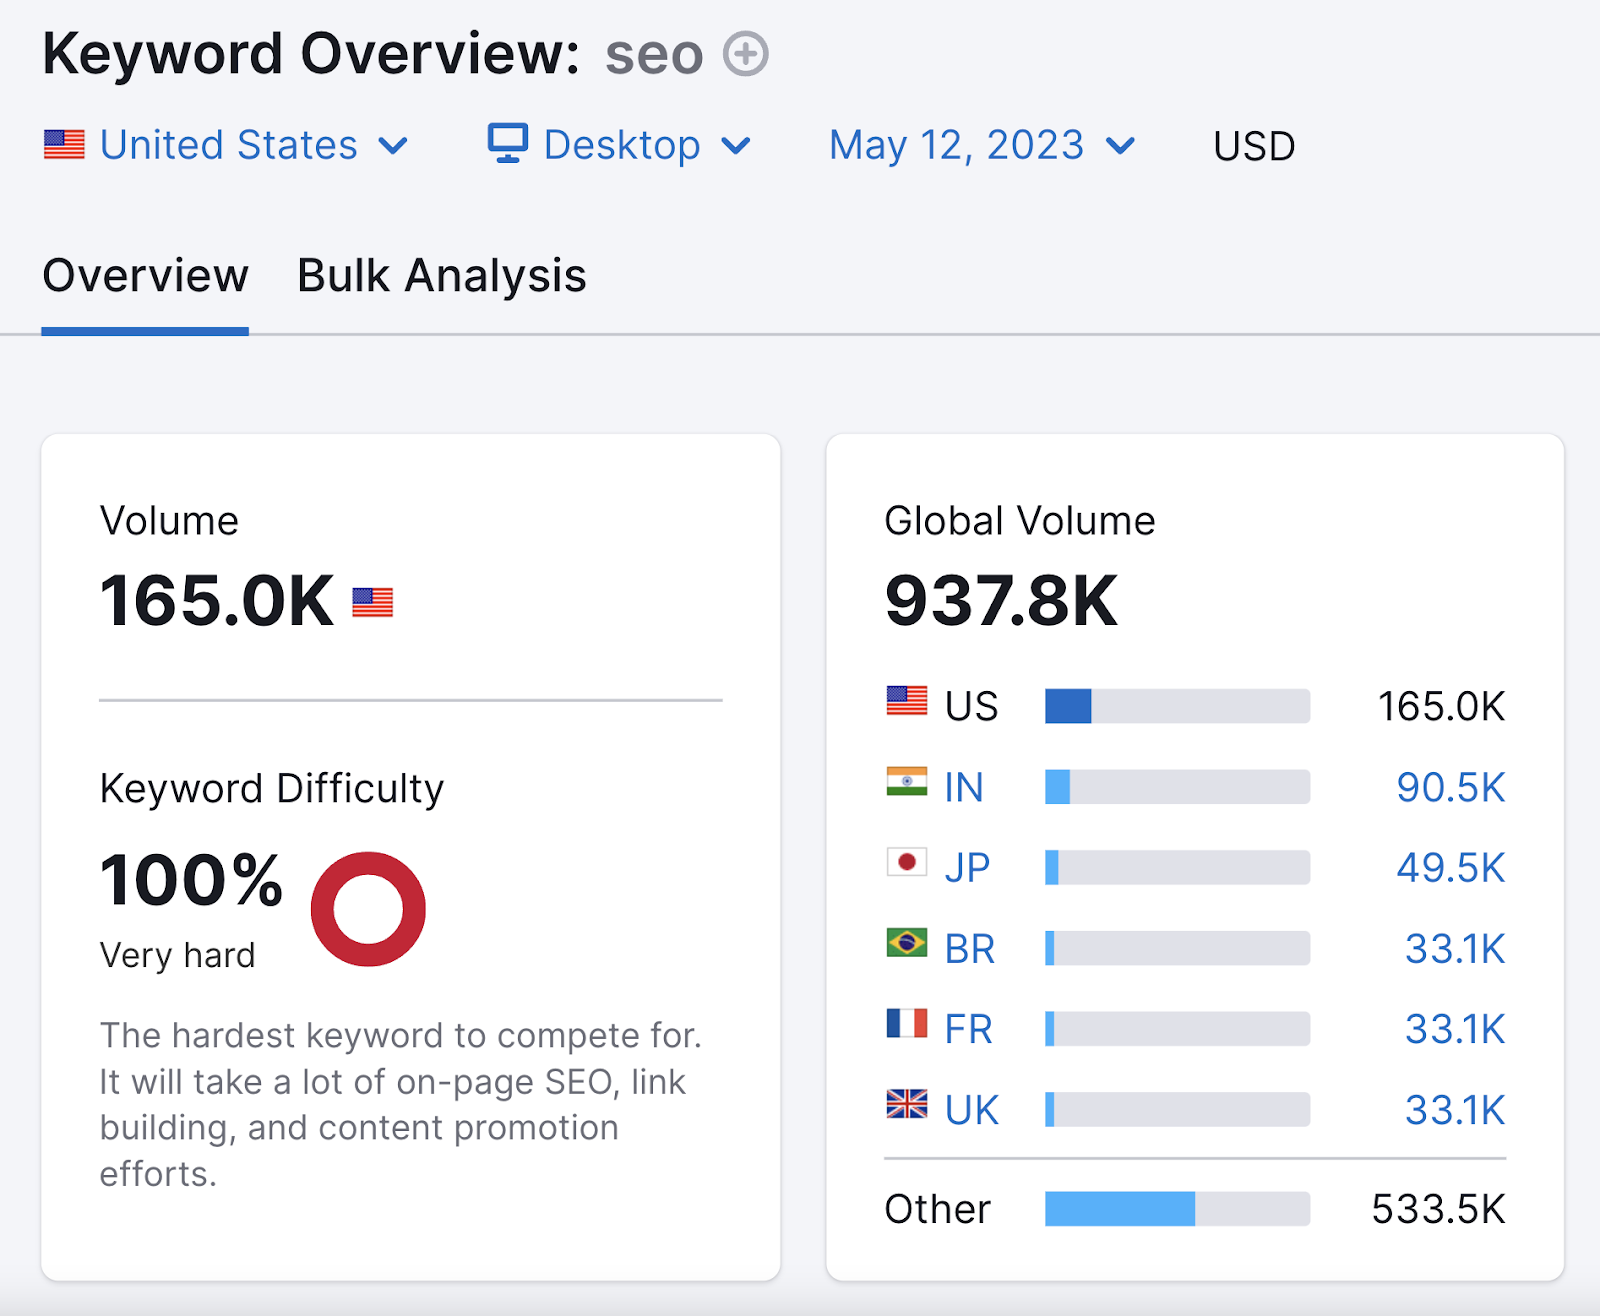 results for “SEO” in Keyword Overview tool